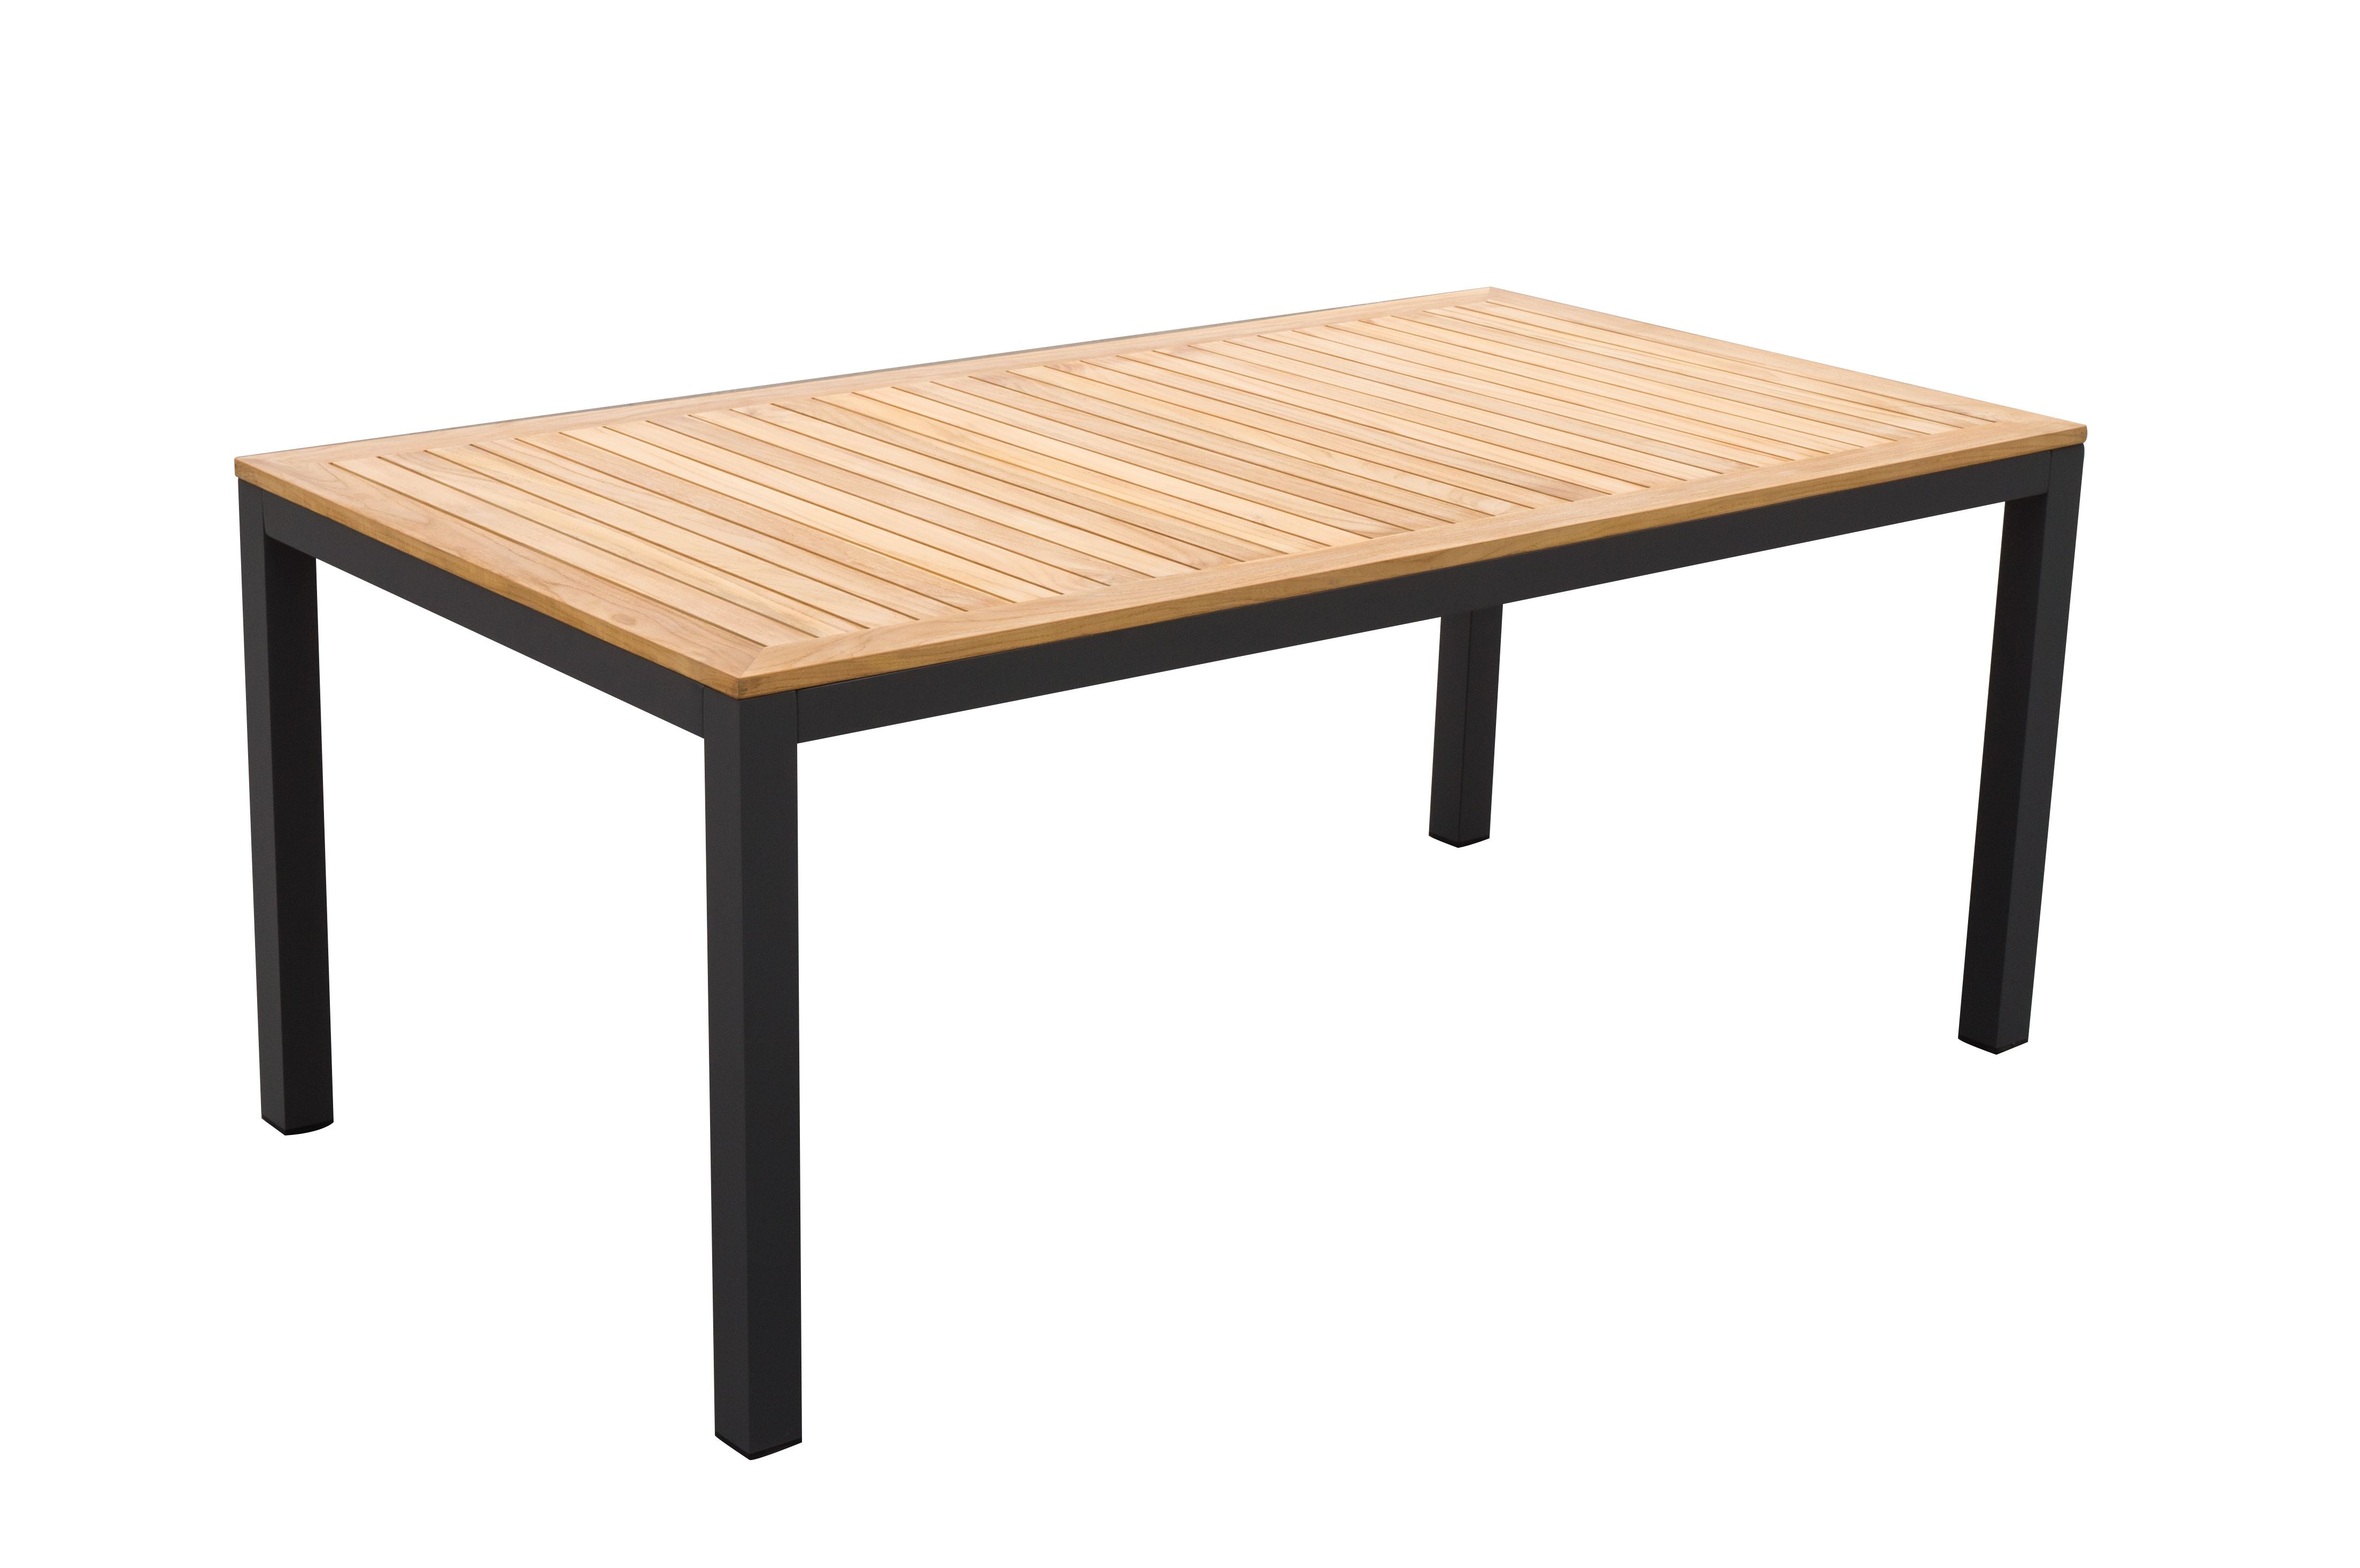 PatioZone Dining Table with Teak Slats Surface and Aluminum Frame and Straight Legs (MOSS-6006T) - Charcoal / Teak